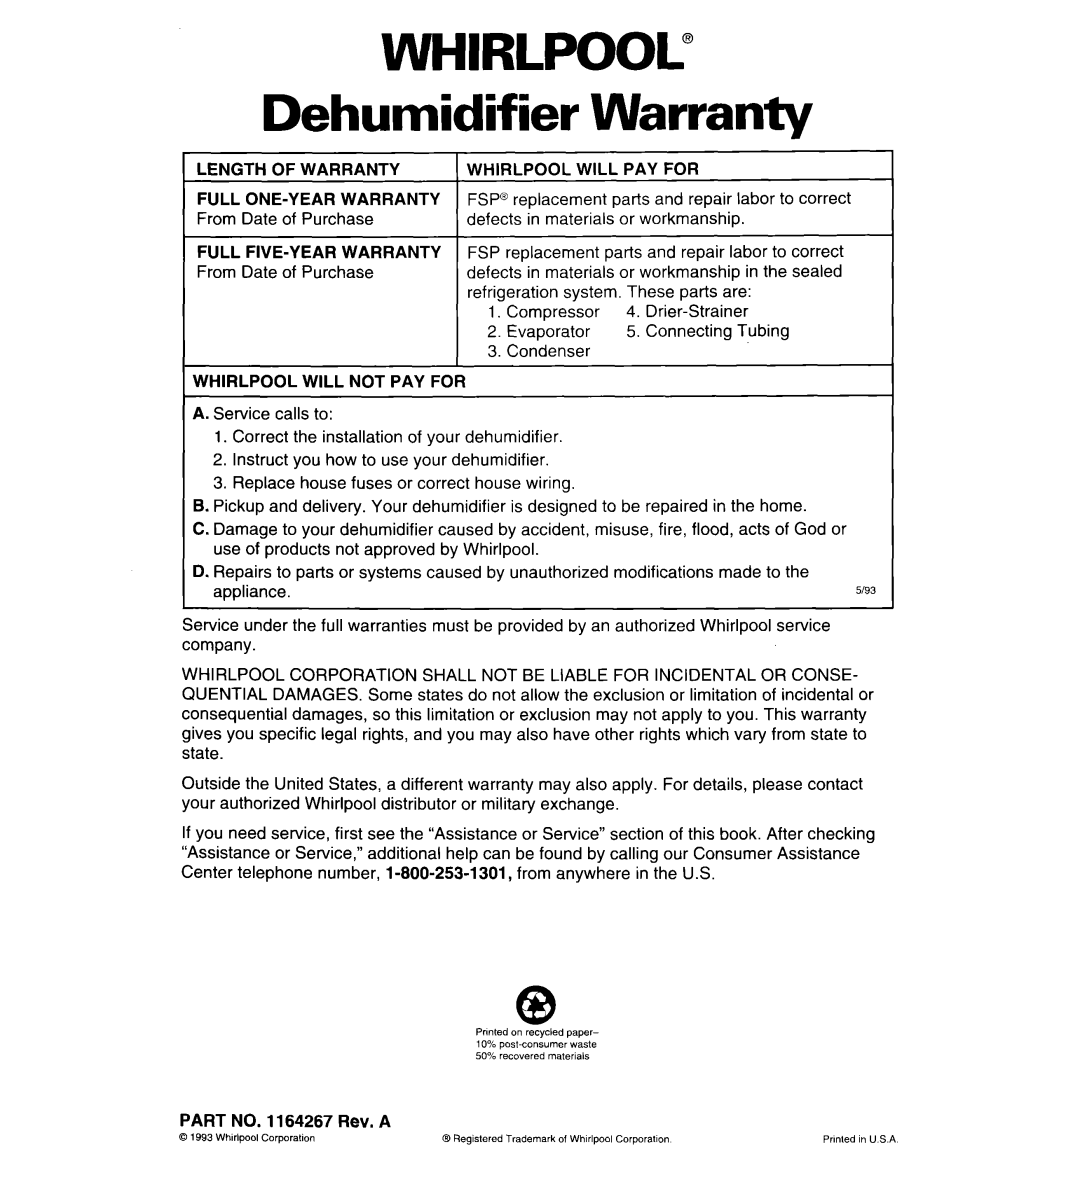 Whirlpool AD030, ADO25, AD050, AD040 important safety instructions WHIRLPOOL” Dehumidifier Warranty 